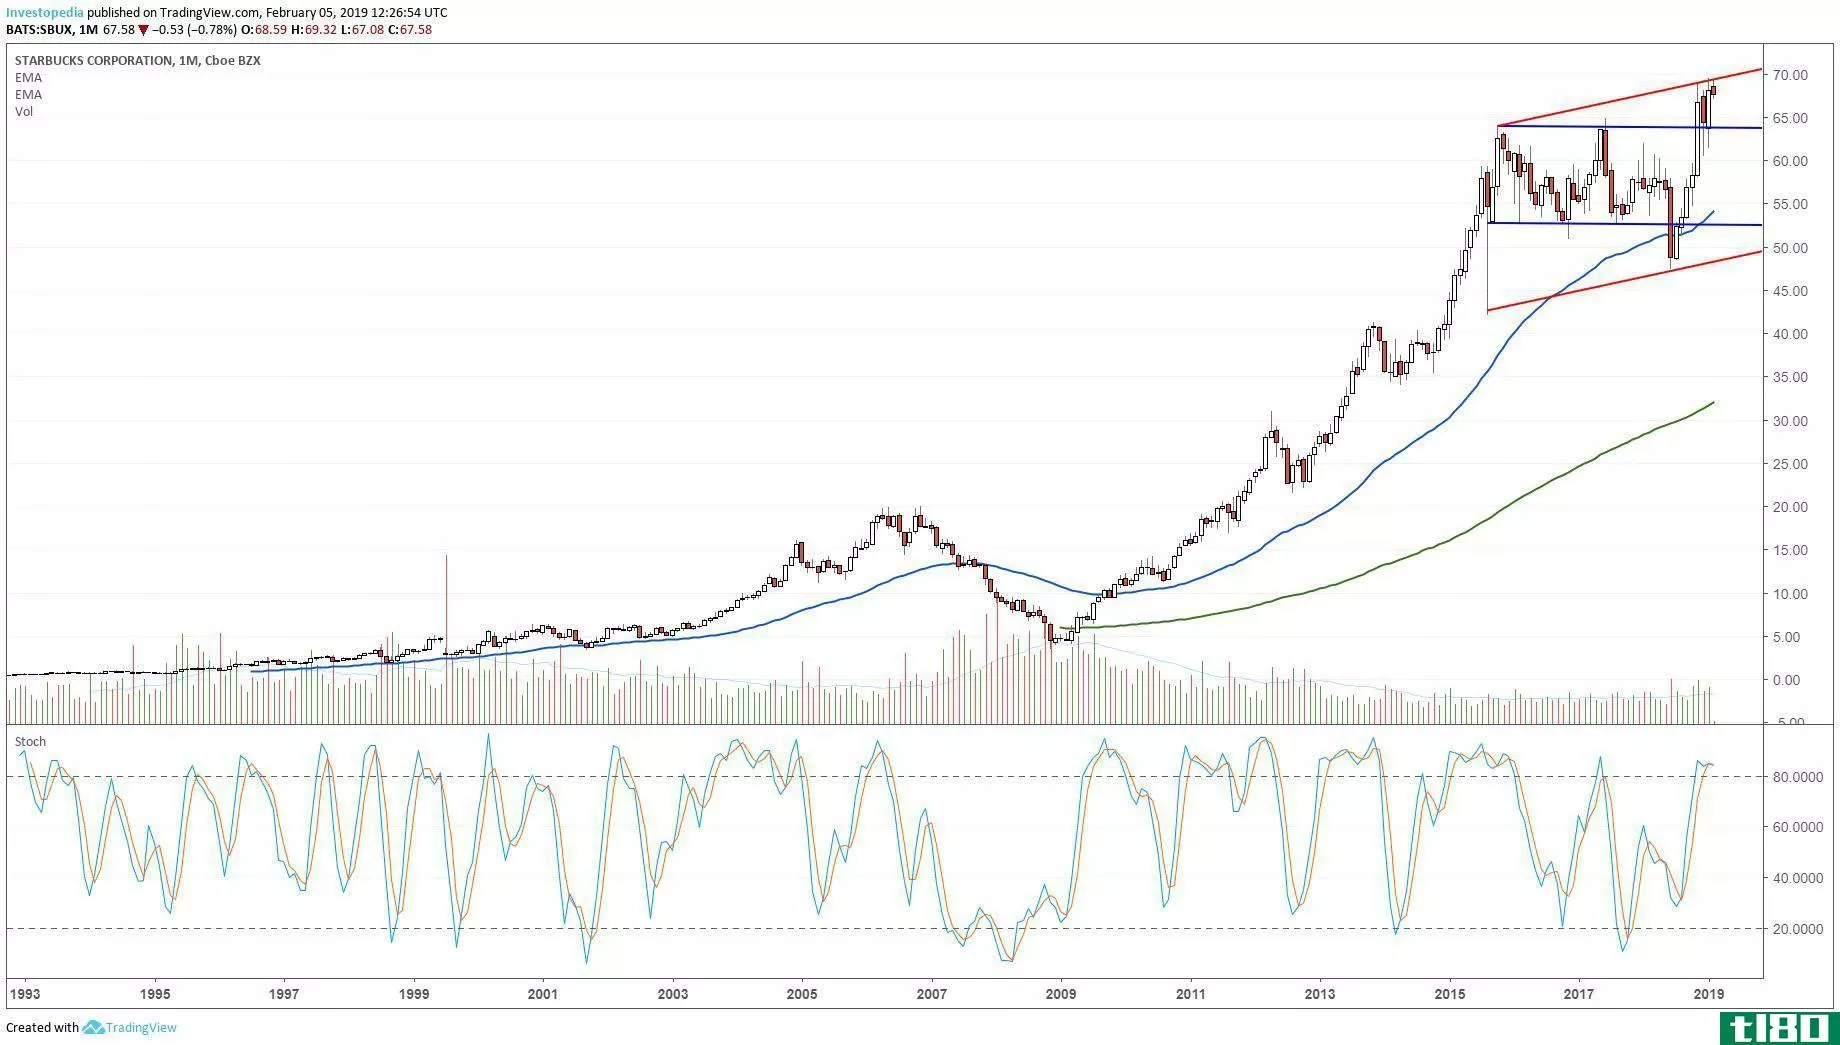 Long-term technical chart showing the share price performance of Starbucks Corporation (SBUX)